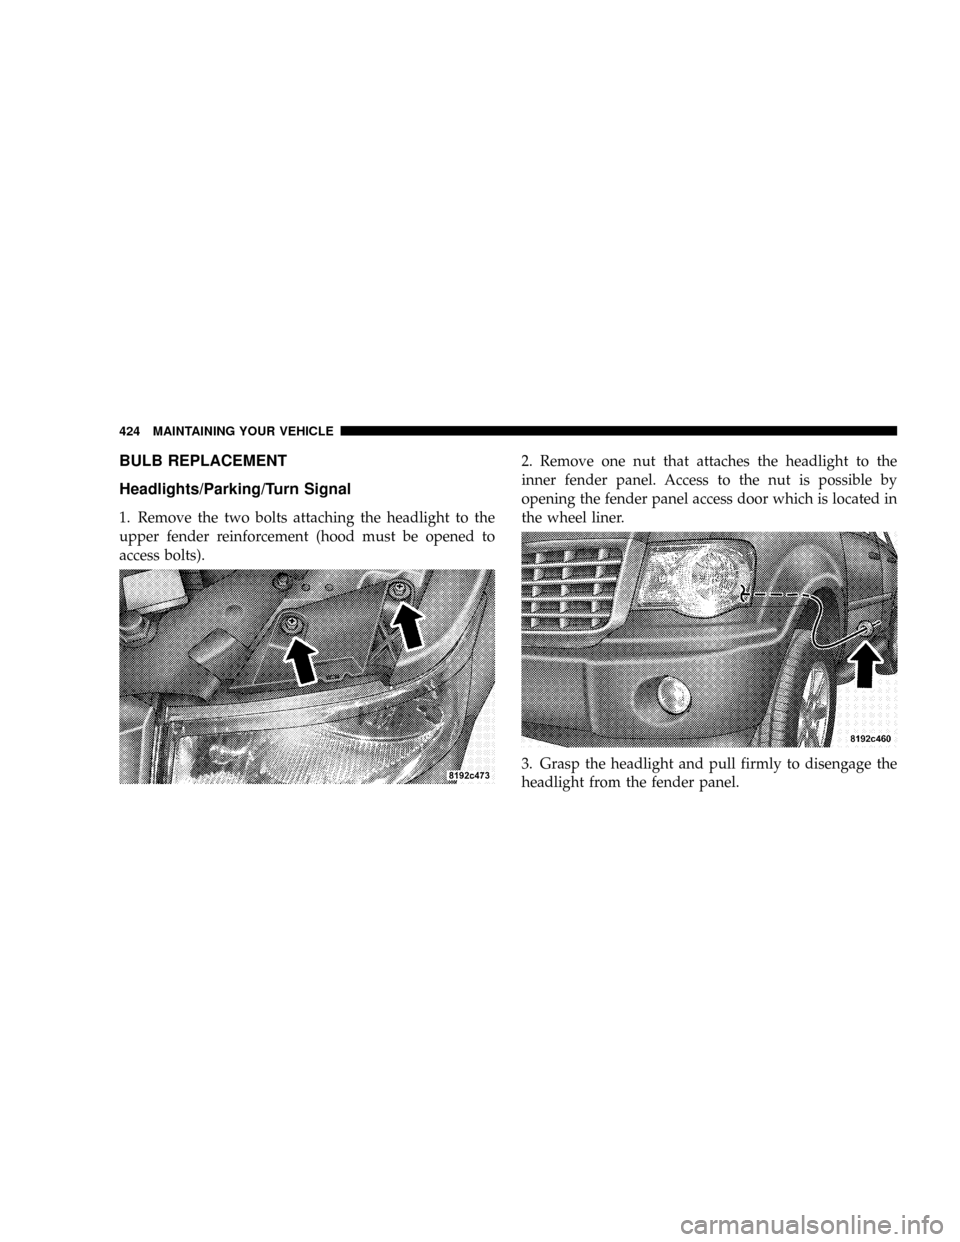 CHRYSLER ASPEN 2009 2.G Owners Manual BULB REPLACEMENT
Headlights/Parking/Turn Signal
1. Remove the two bolts attaching the headlight to the
upper fender reinforcement (hood must be opened to
access bolts).2. Remove one nut that attaches 